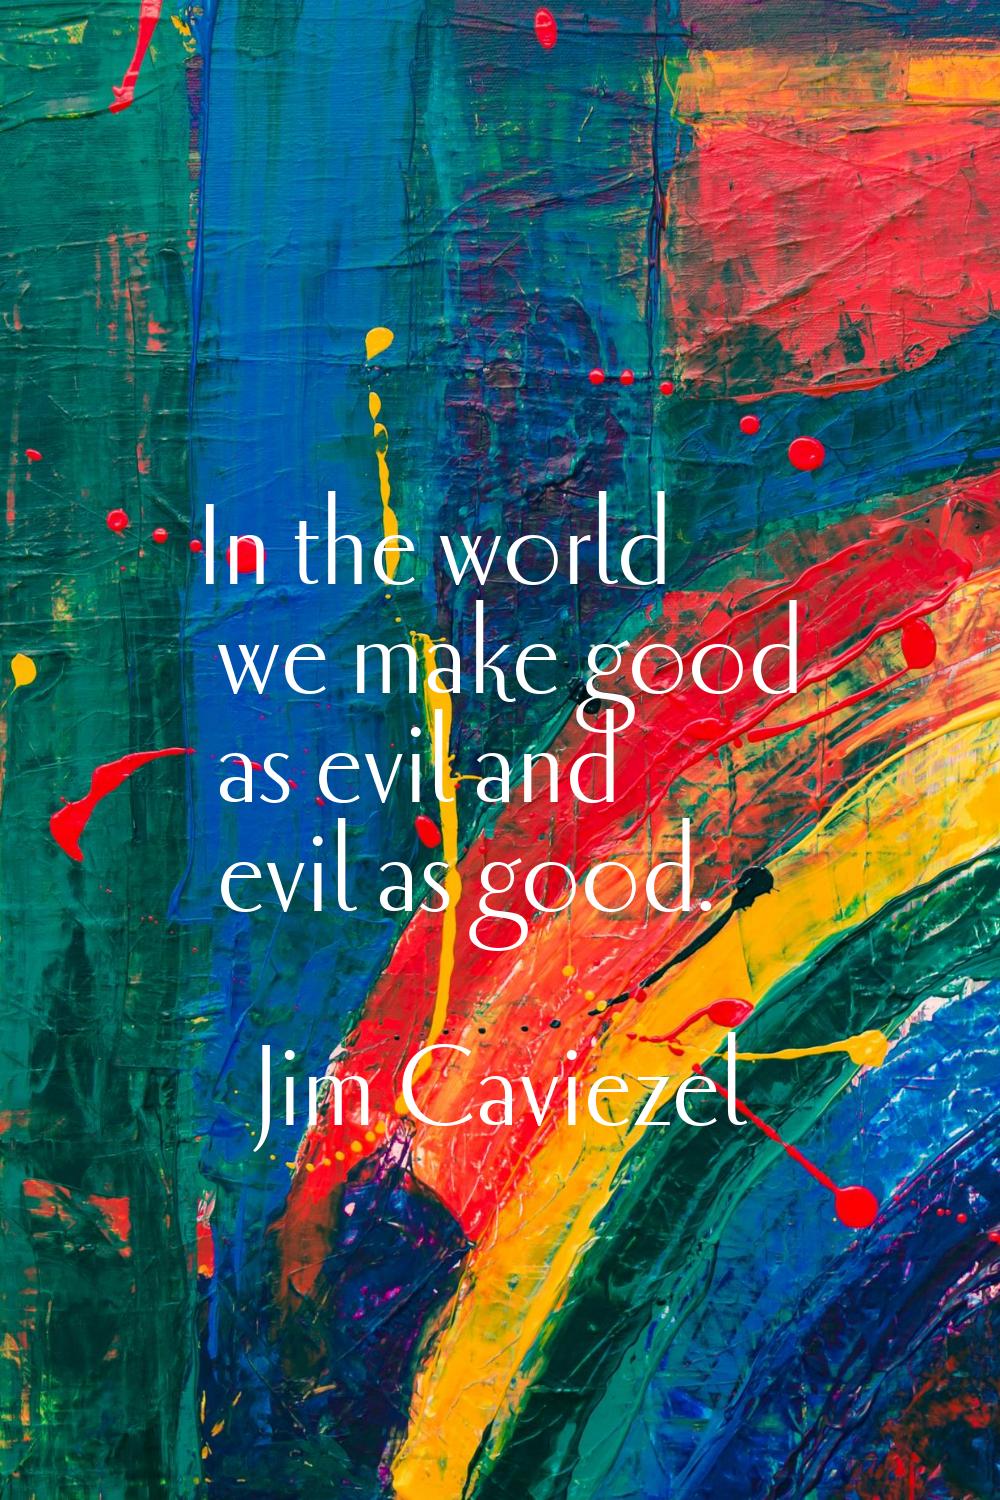 In the world we make good as evil and evil as good.